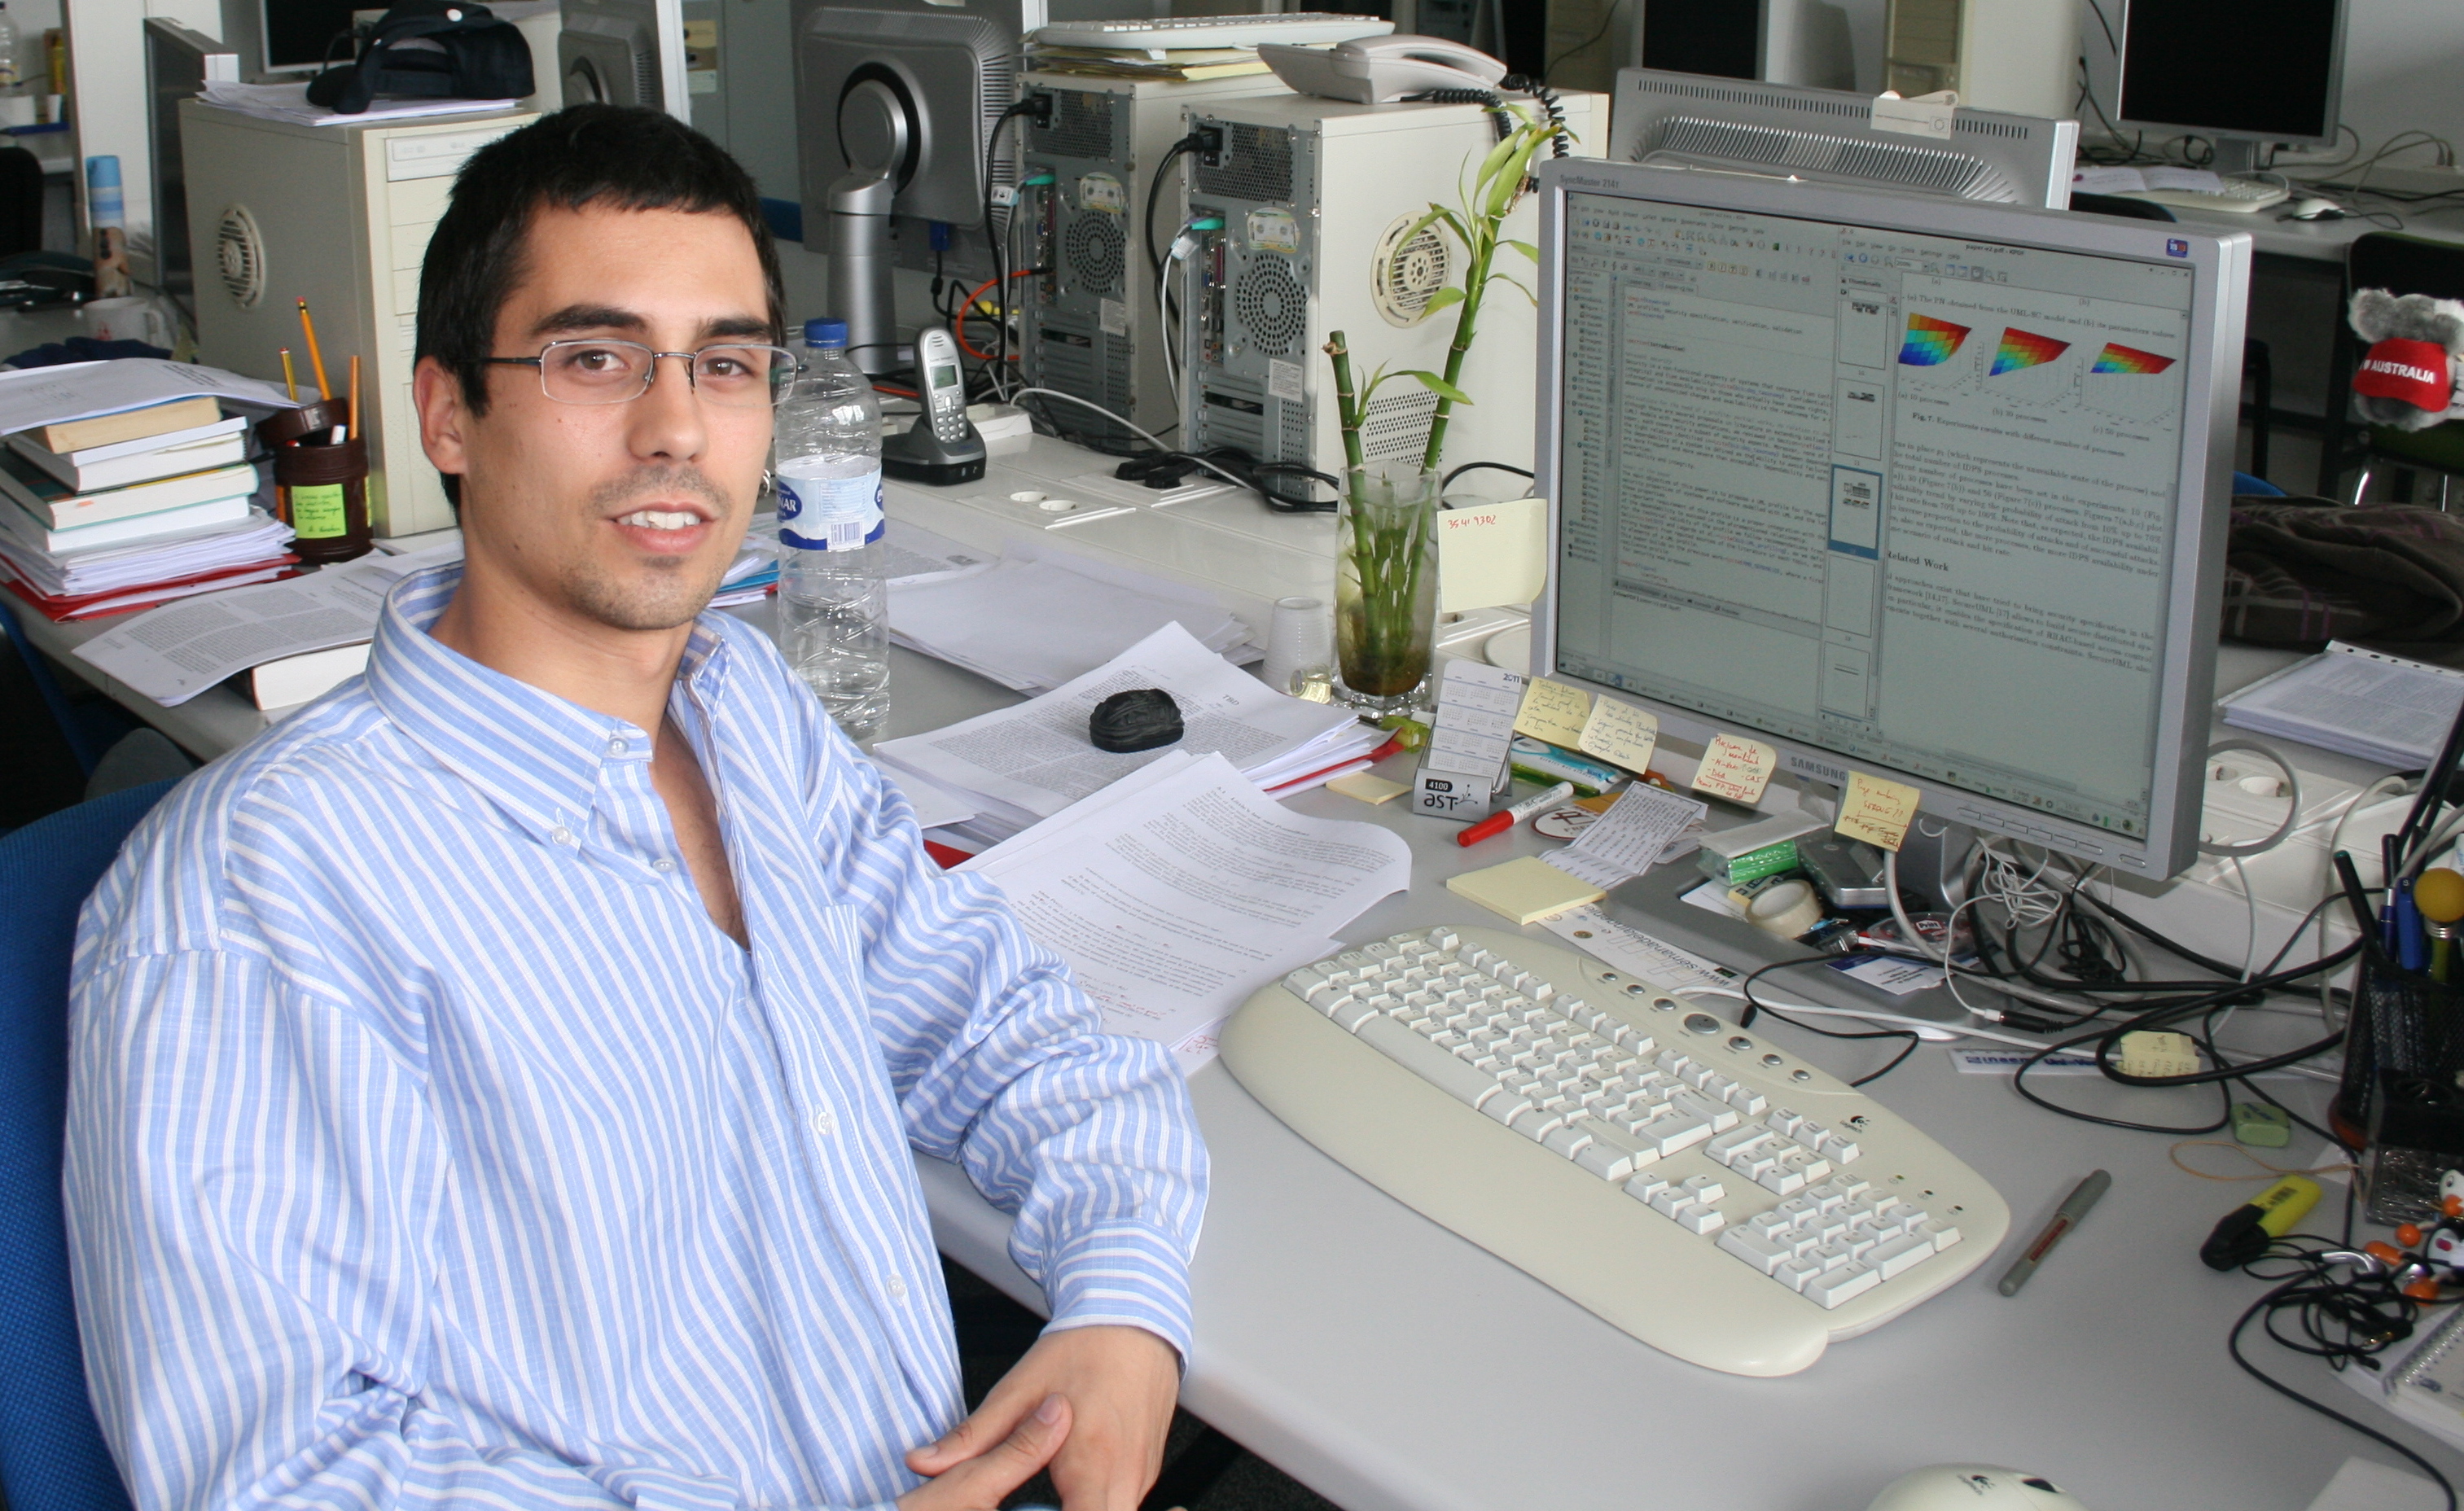 On 2011, when I was doing my PhD